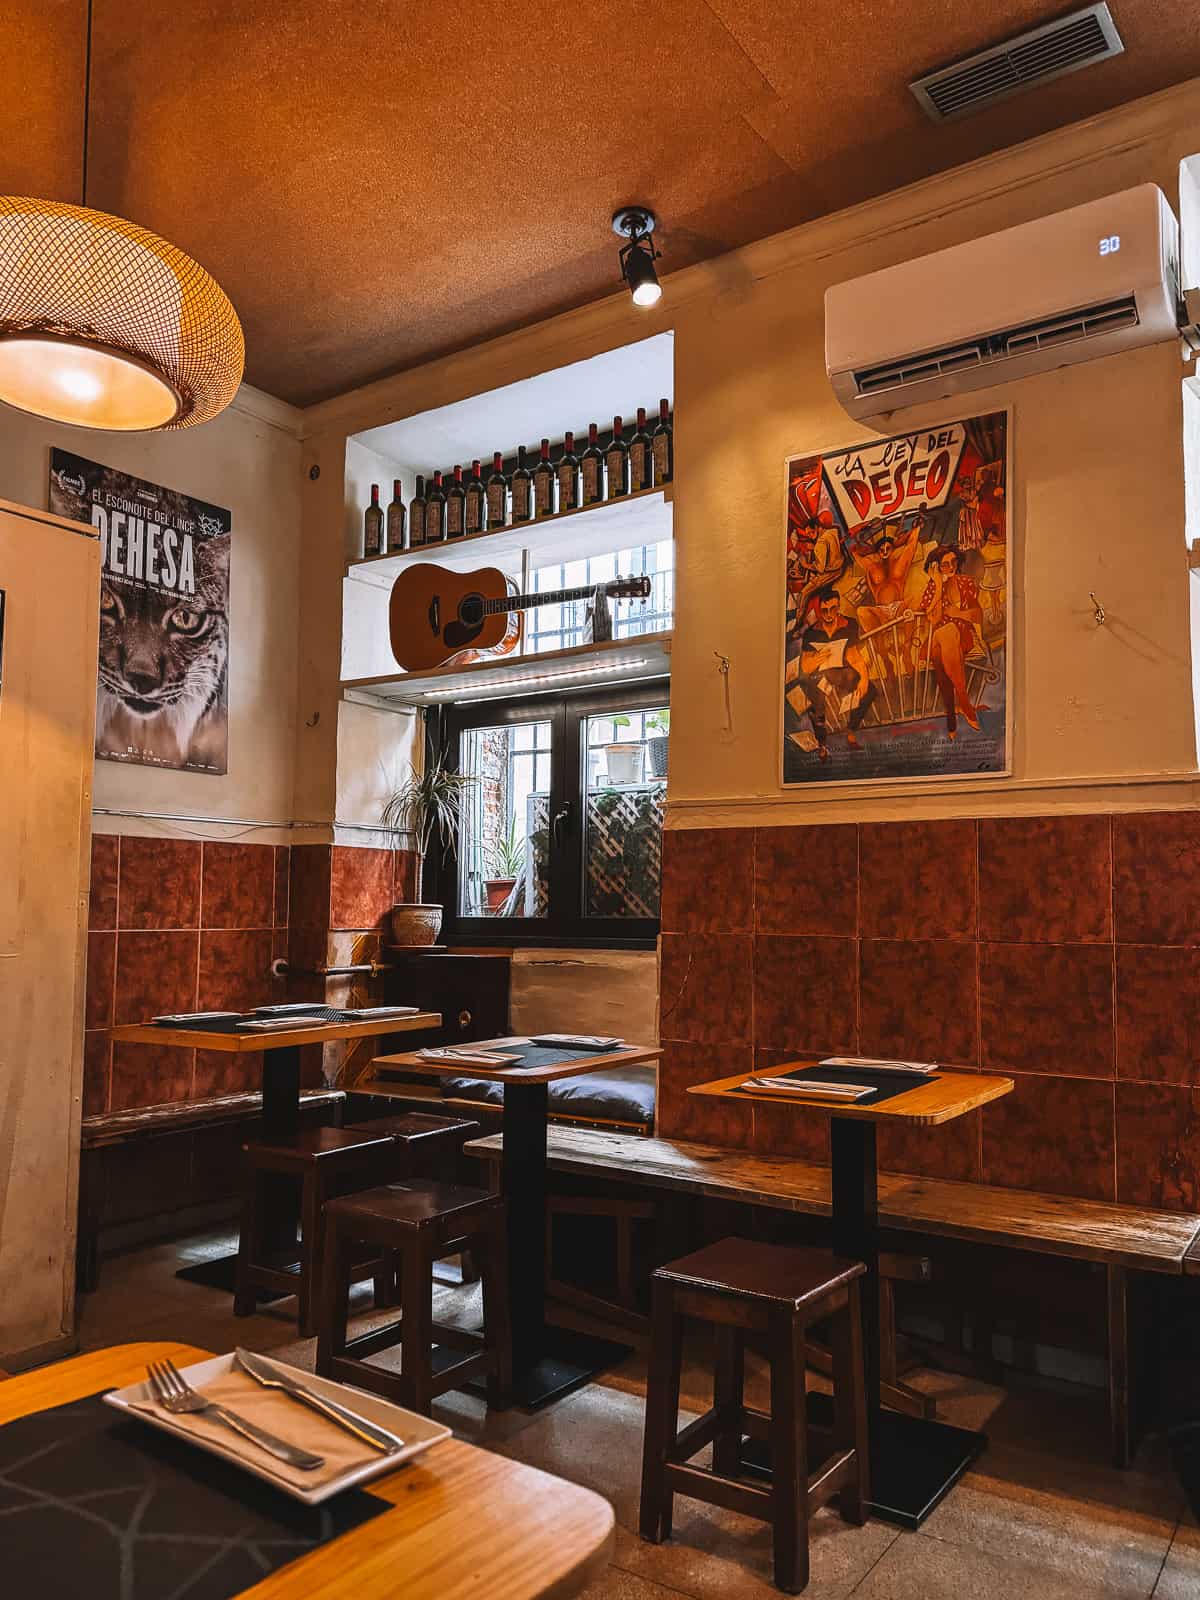 Cozy interior of 'Taberna El Sur' with wooden tables and benches, decorative bottles on a shelf, a guitar hanging on the wall, and a vintage Spanish movie poster